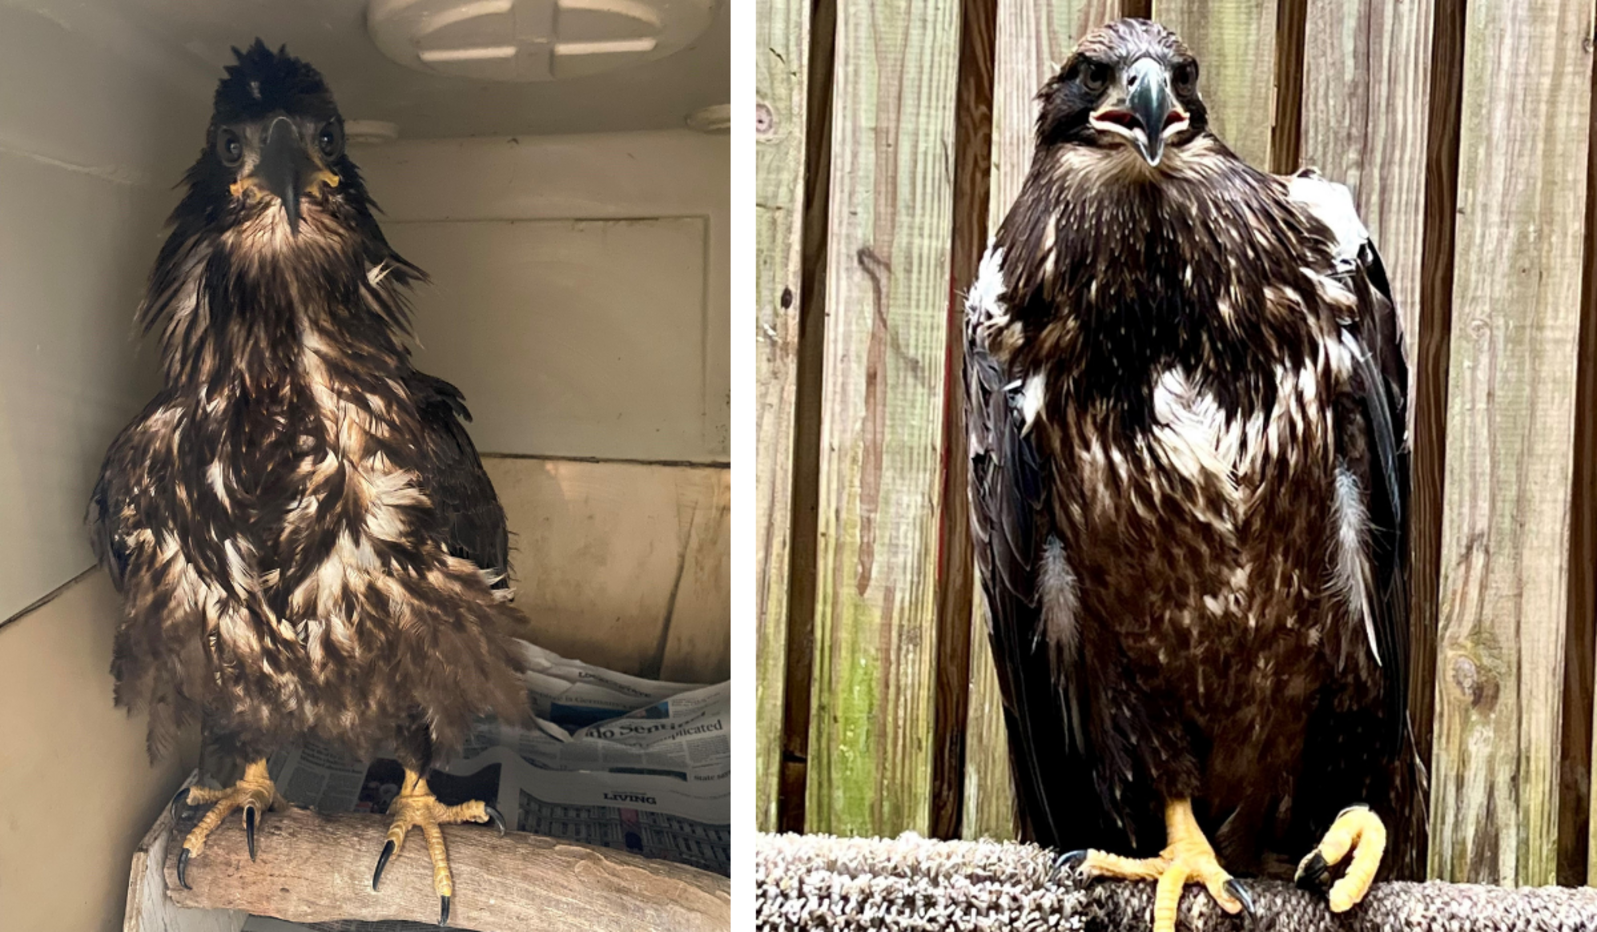 Side-by-side photos of Connick, a juvenile Bald Eagle, taken several weeks apart.